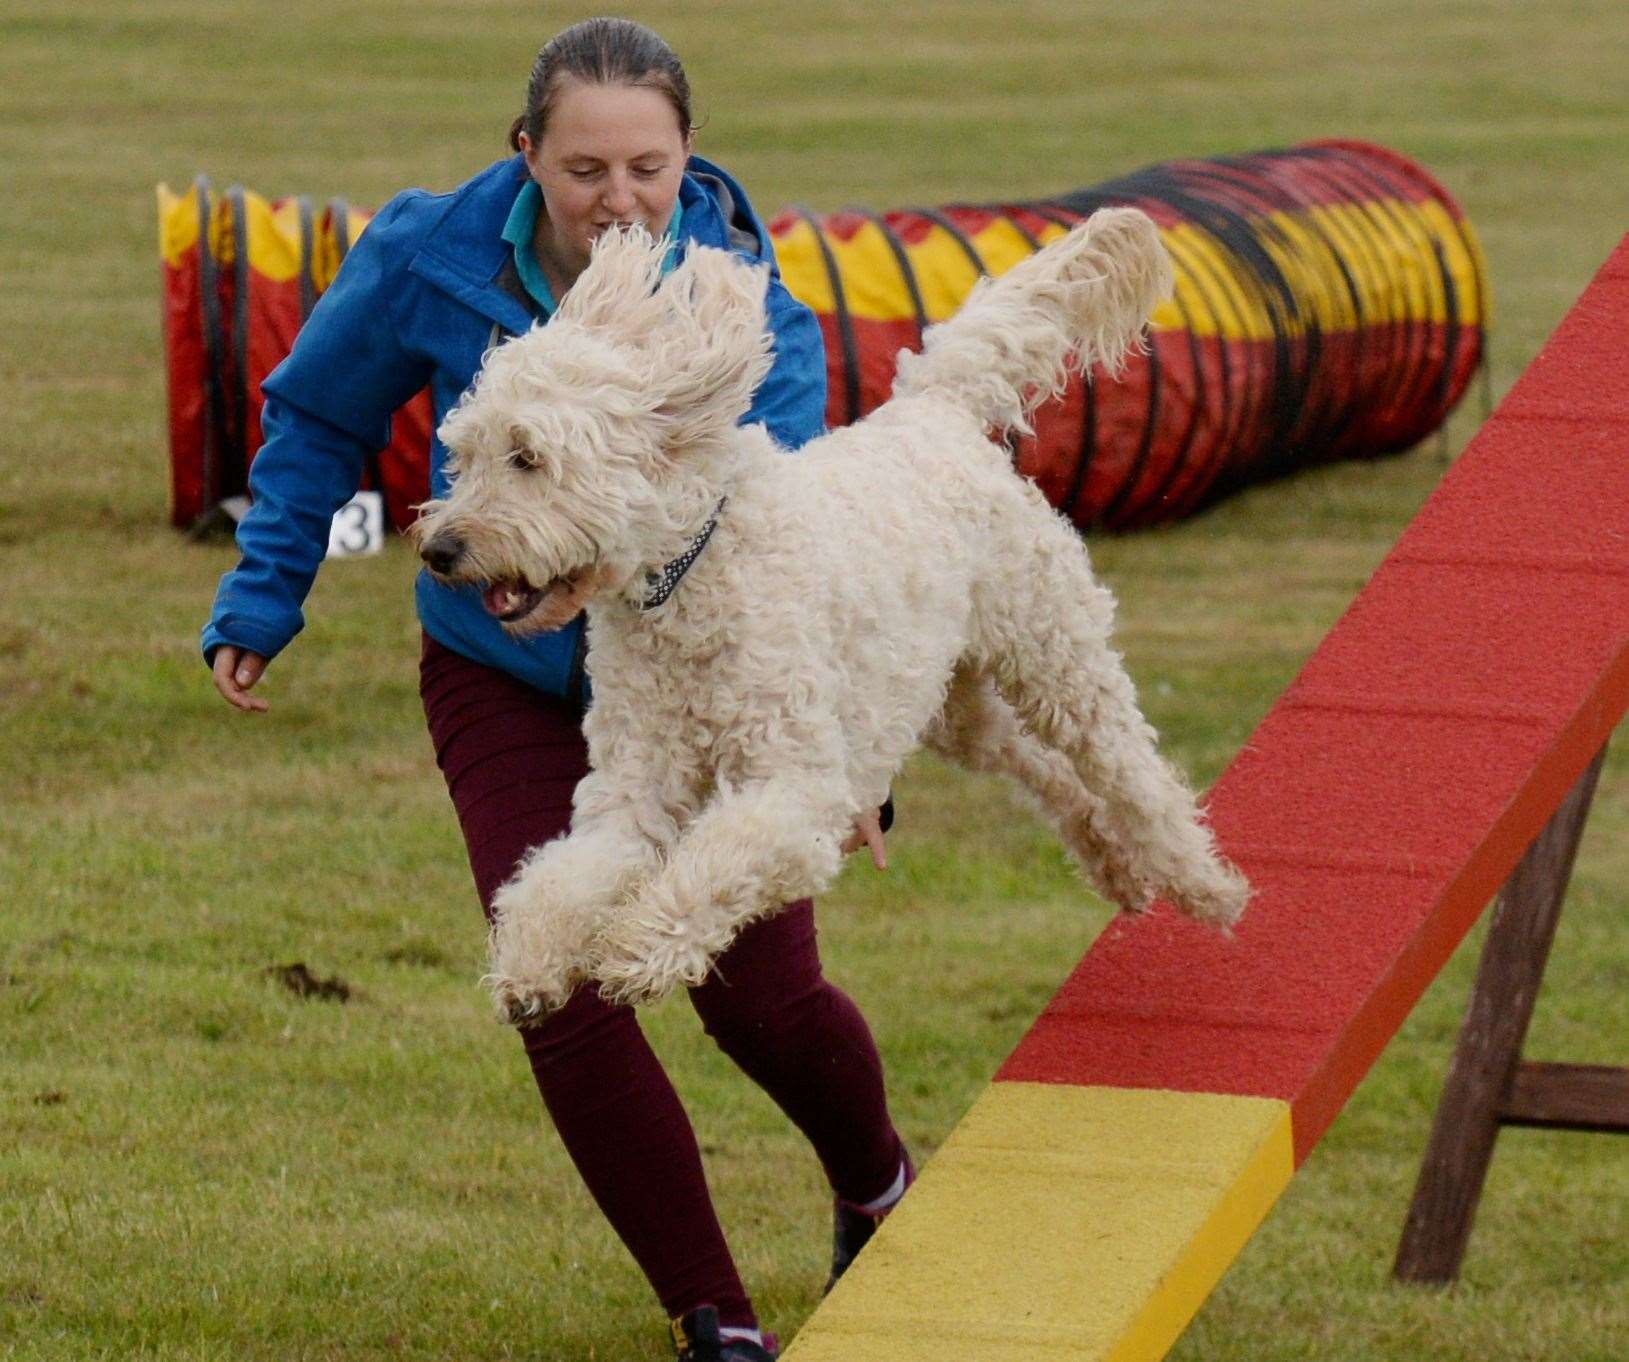 The event usually attracts crowds of up to 25,000 each year over its duration and is a mainstay of the agricultural community. Dog agility demonstrations are amongst the many attrarctions. Picture: Gary Anthony.